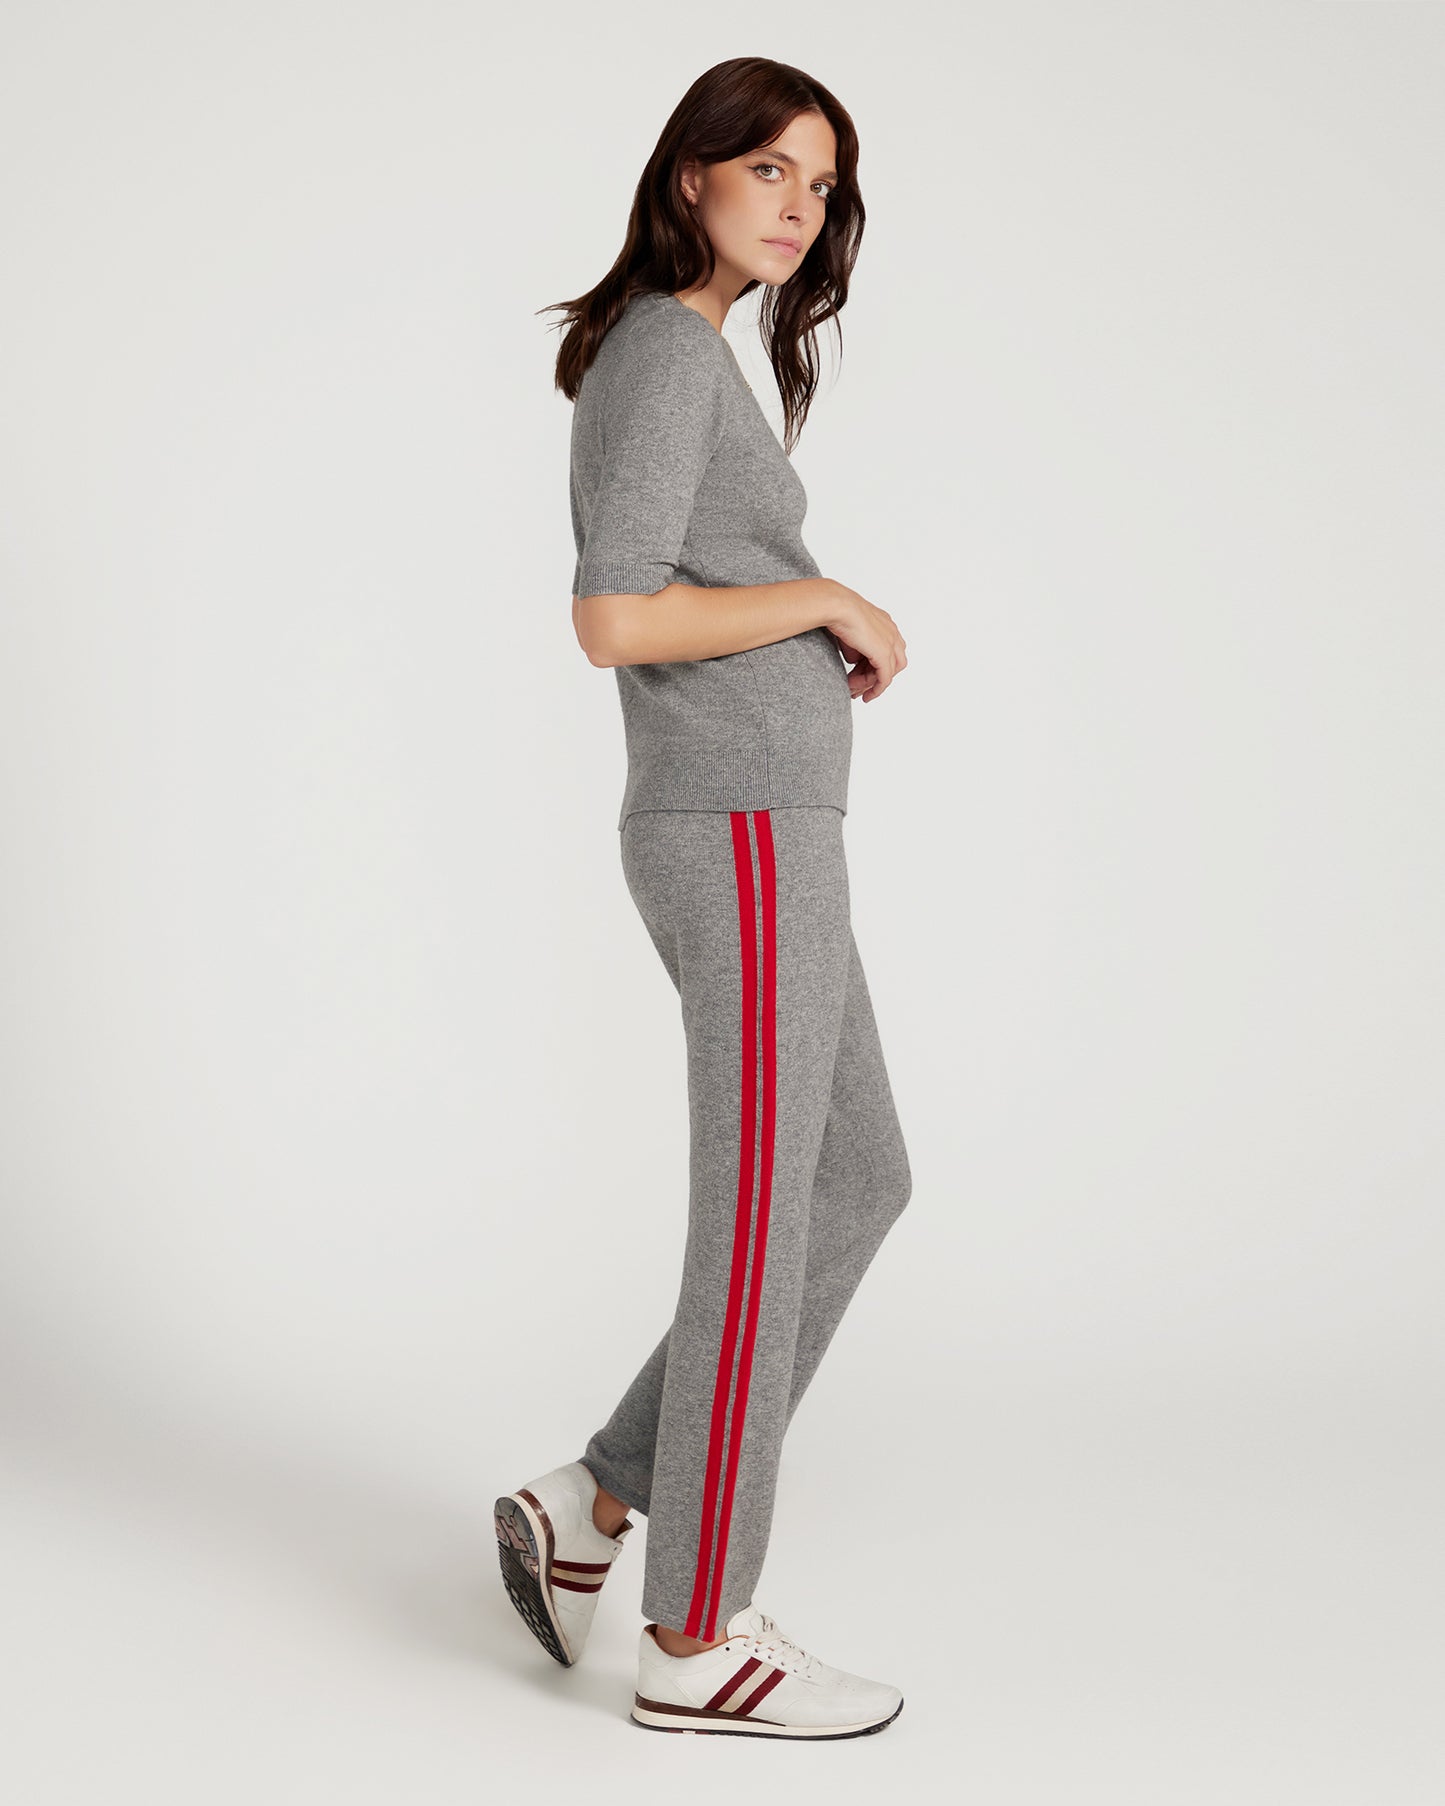 Cashmere & Wool Pant - Grey With Red Stripe